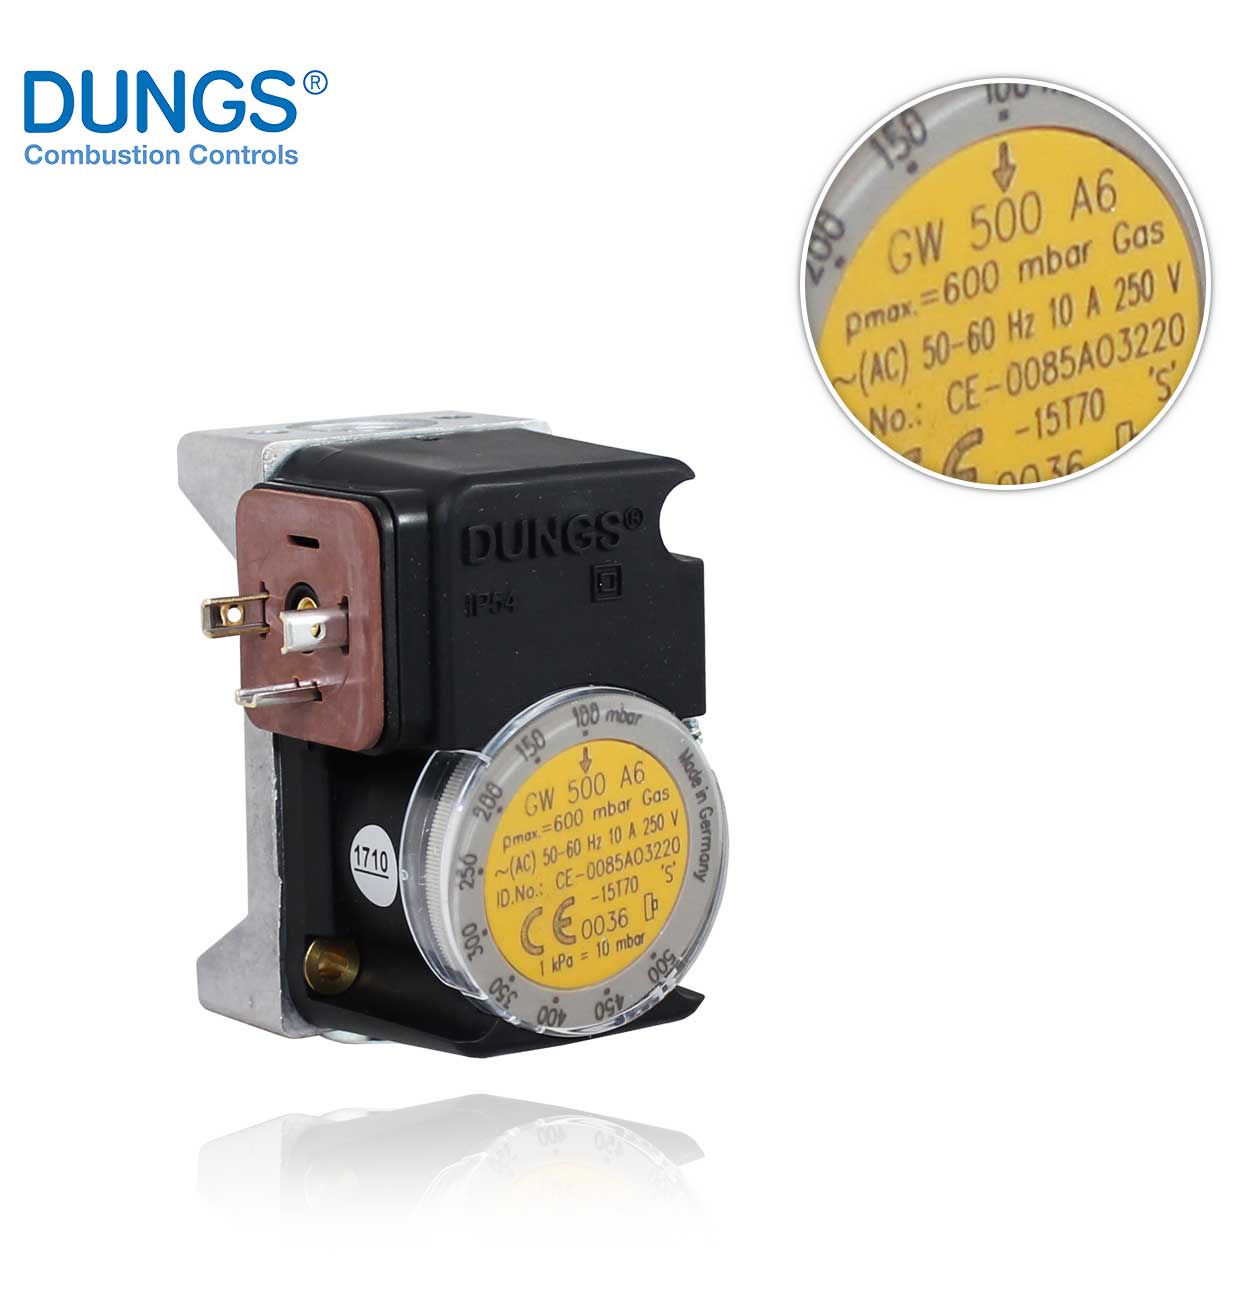 GW 500 A6 DUNGS PRESSURE SWITCH